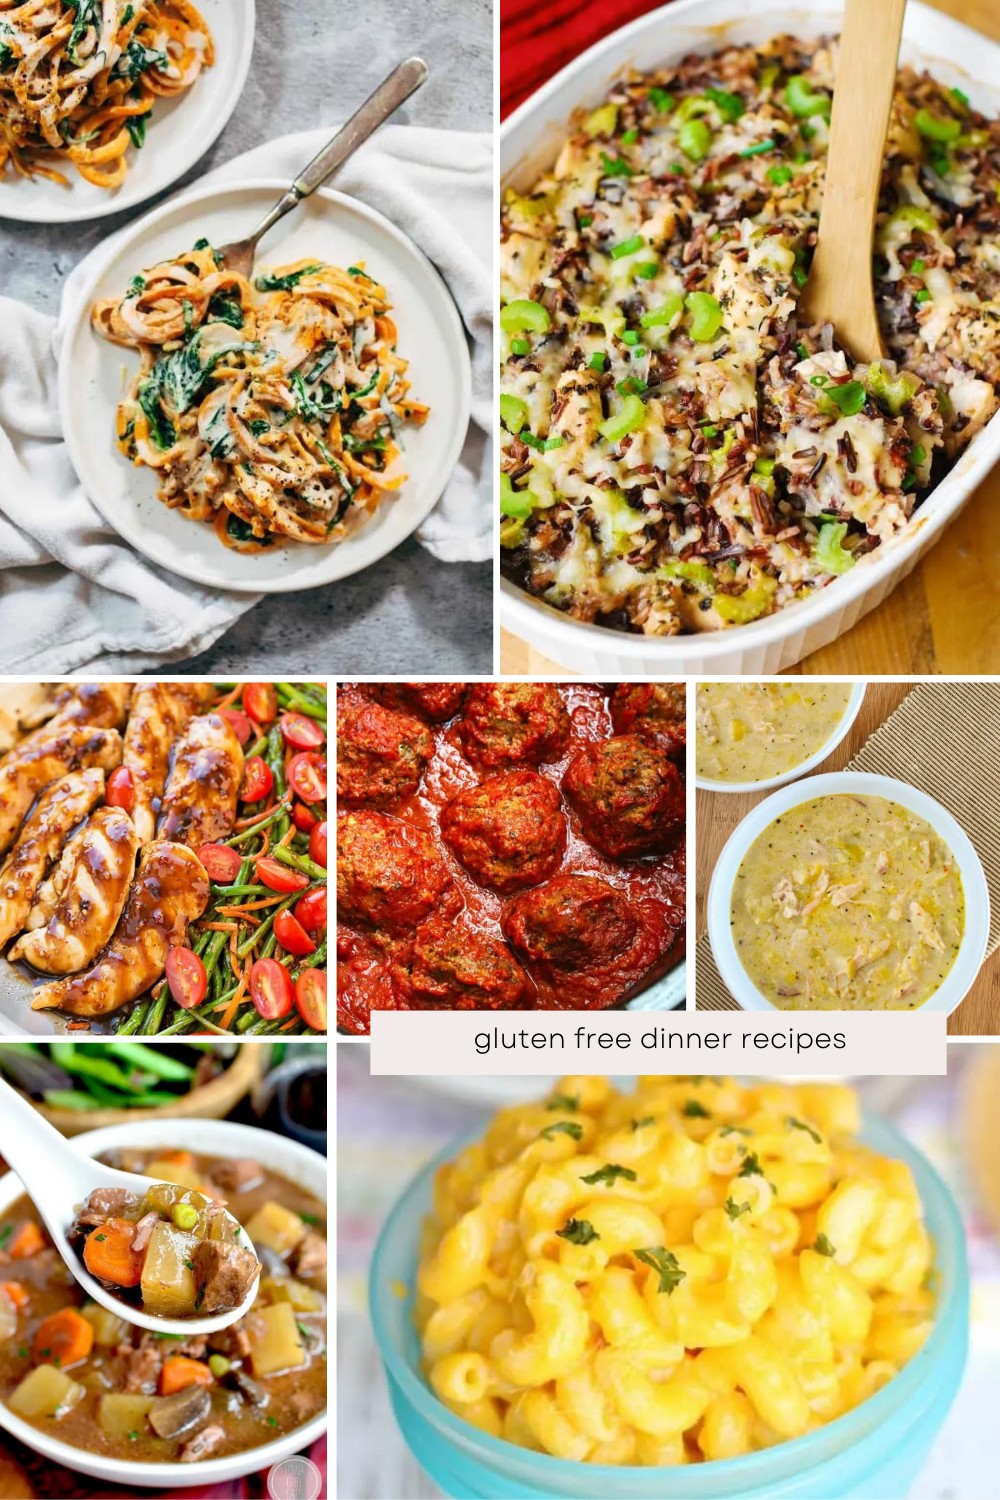 Sticking to a gluten-free diet can be challenging, especially if your family loves their favorite meals like pizza and lasagna. But cooking separate meals is no fun! Discover 12 gluten-free dinner recipes that are so tasty and easy, the whole family will enjoy them. 🌽🍲🥘 #GlutenFreeEats #FamilyDinner #TastyAndEasy







